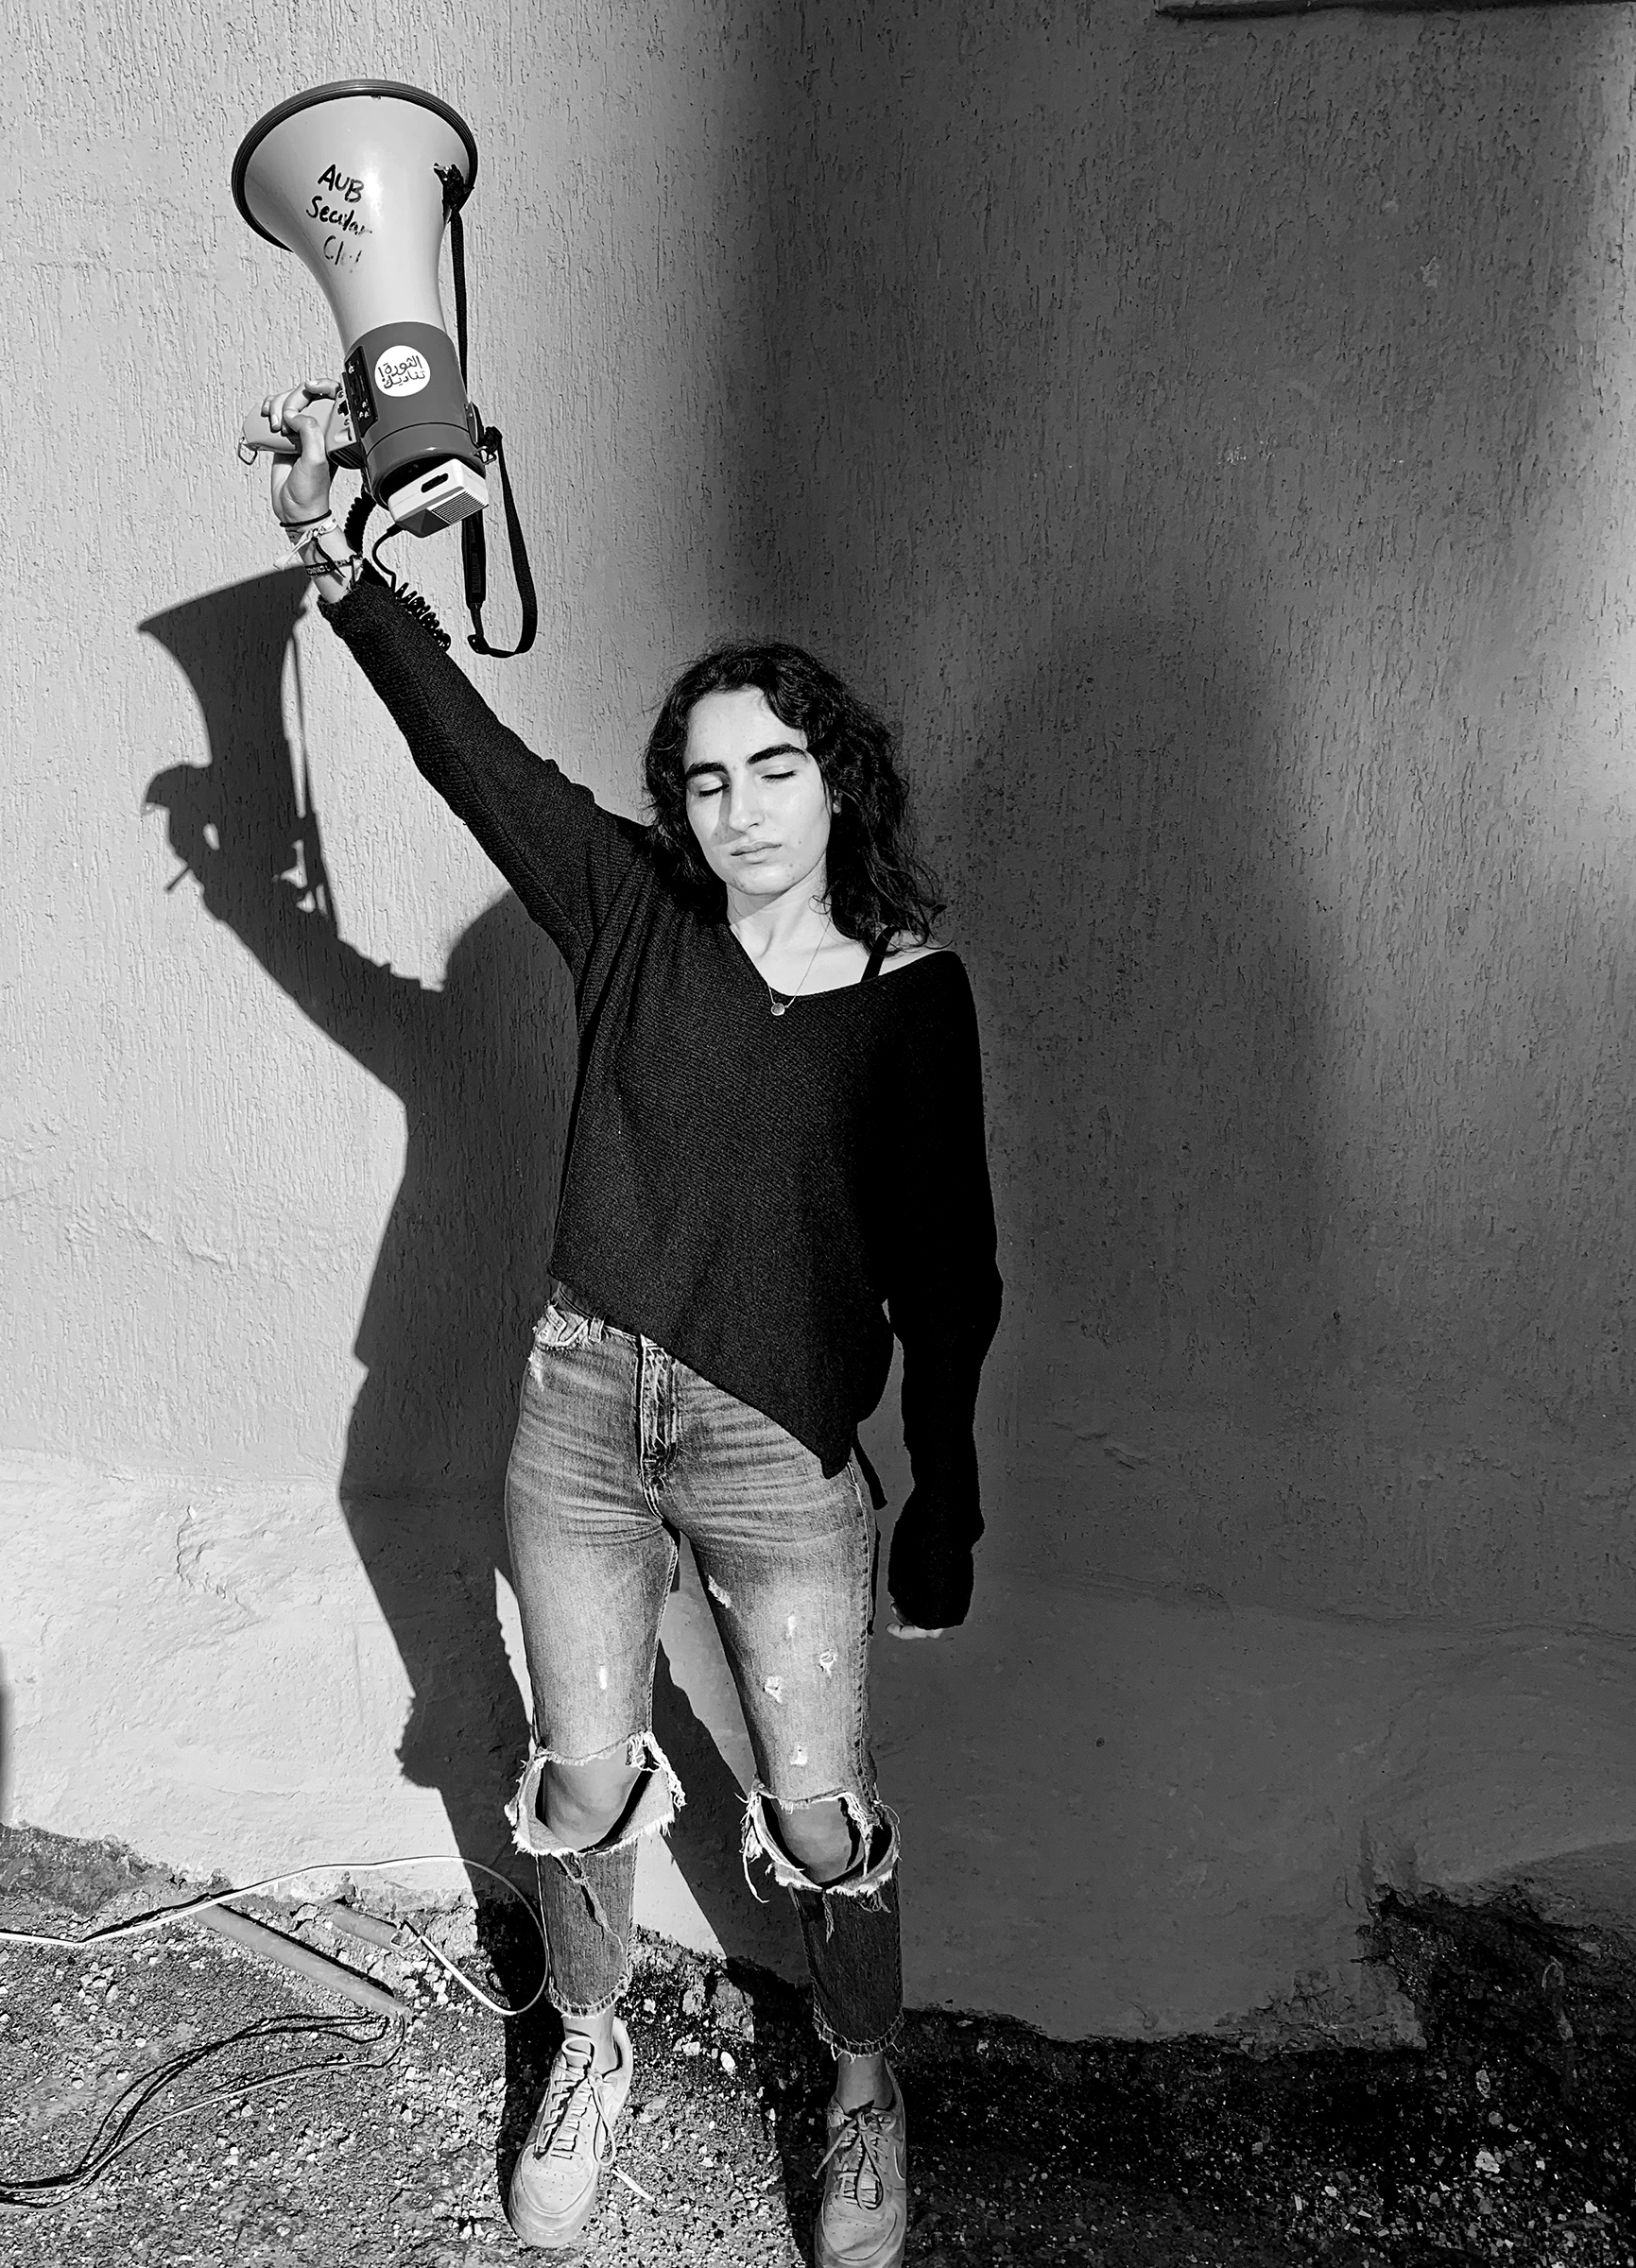 Sabra is the president of the Secular Club at the American University of Beirut, which in November became the first nonsectarian party to win student elections there since 1990. (Moises Saman—Magnum Photos for TIME)